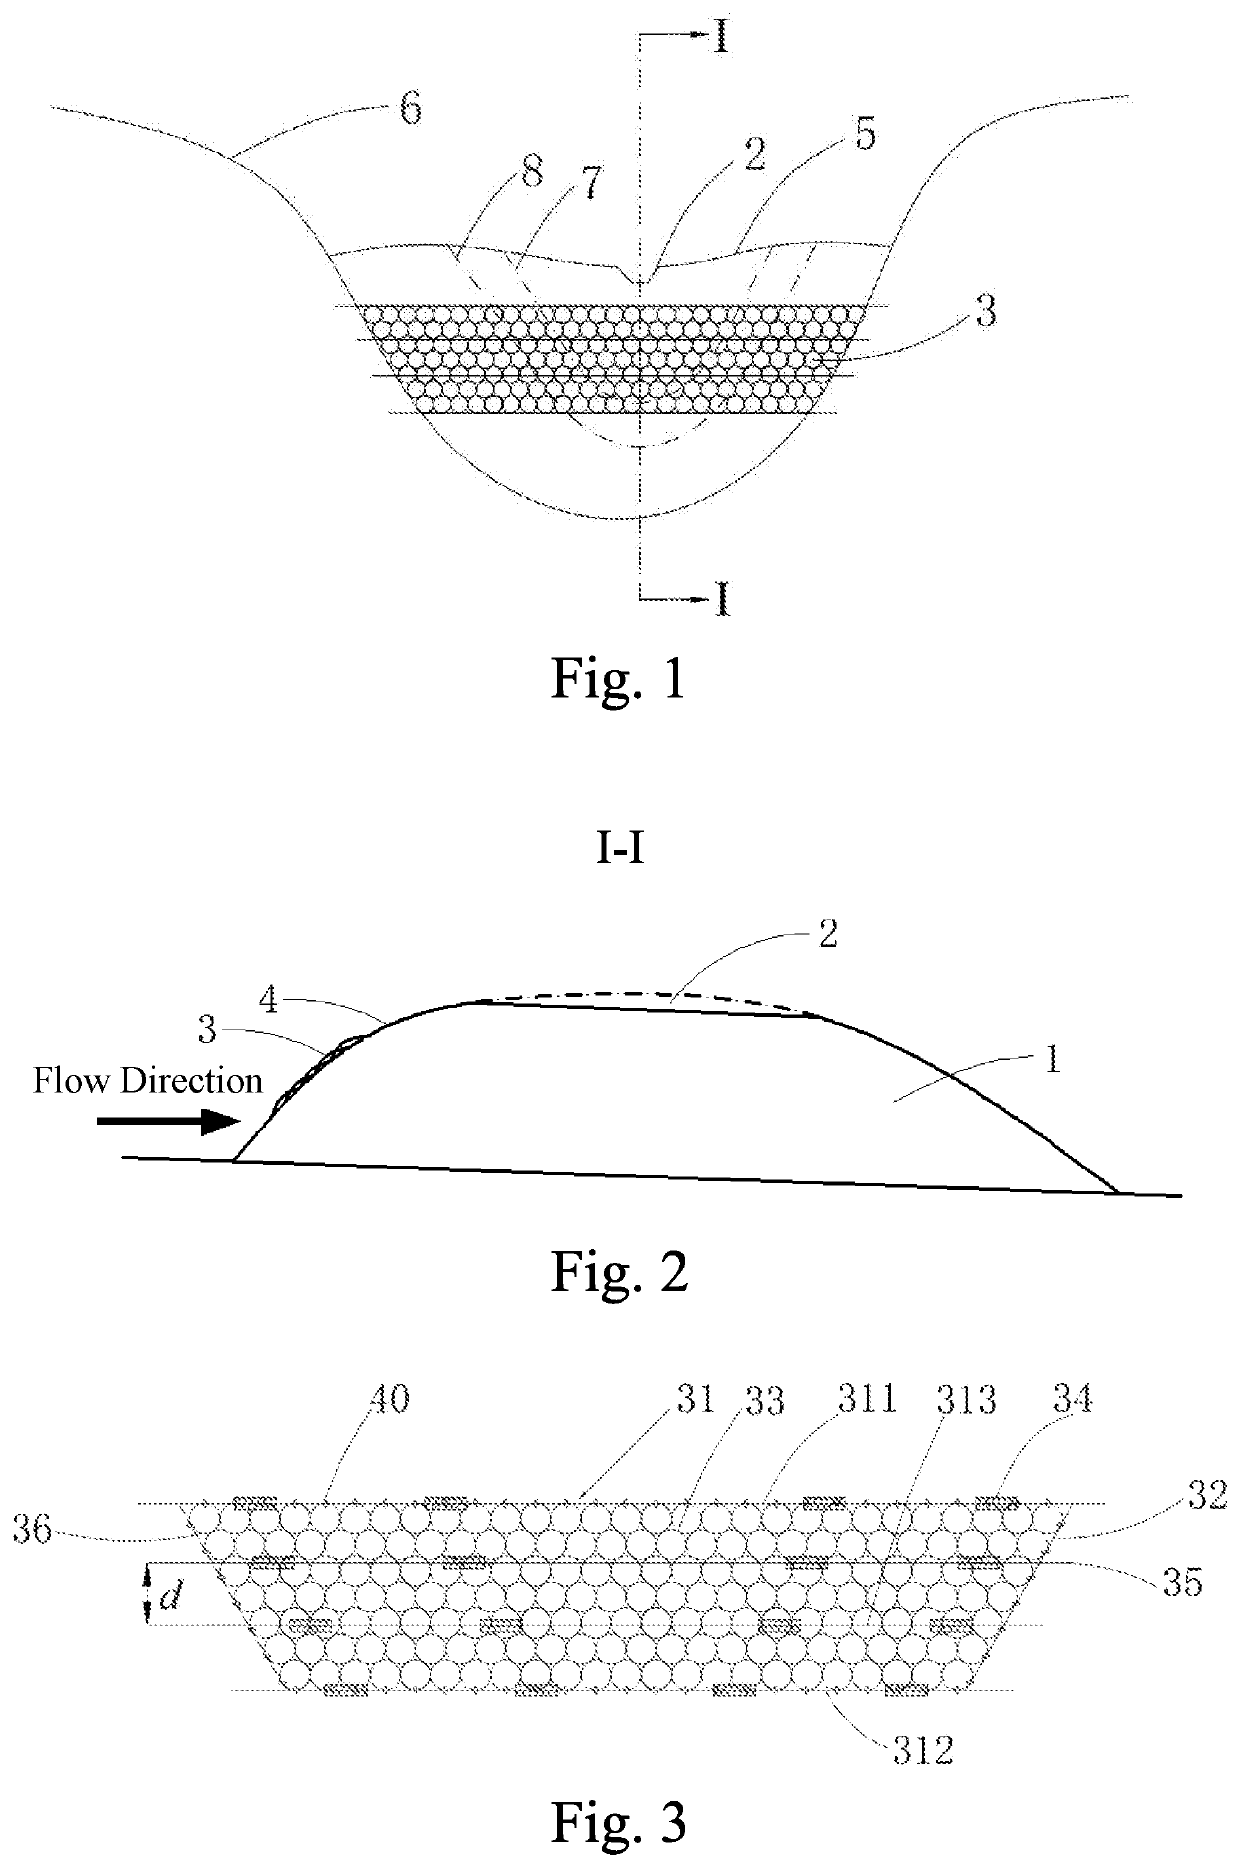 Method for regulating and controlling discharge flow of dammed lake